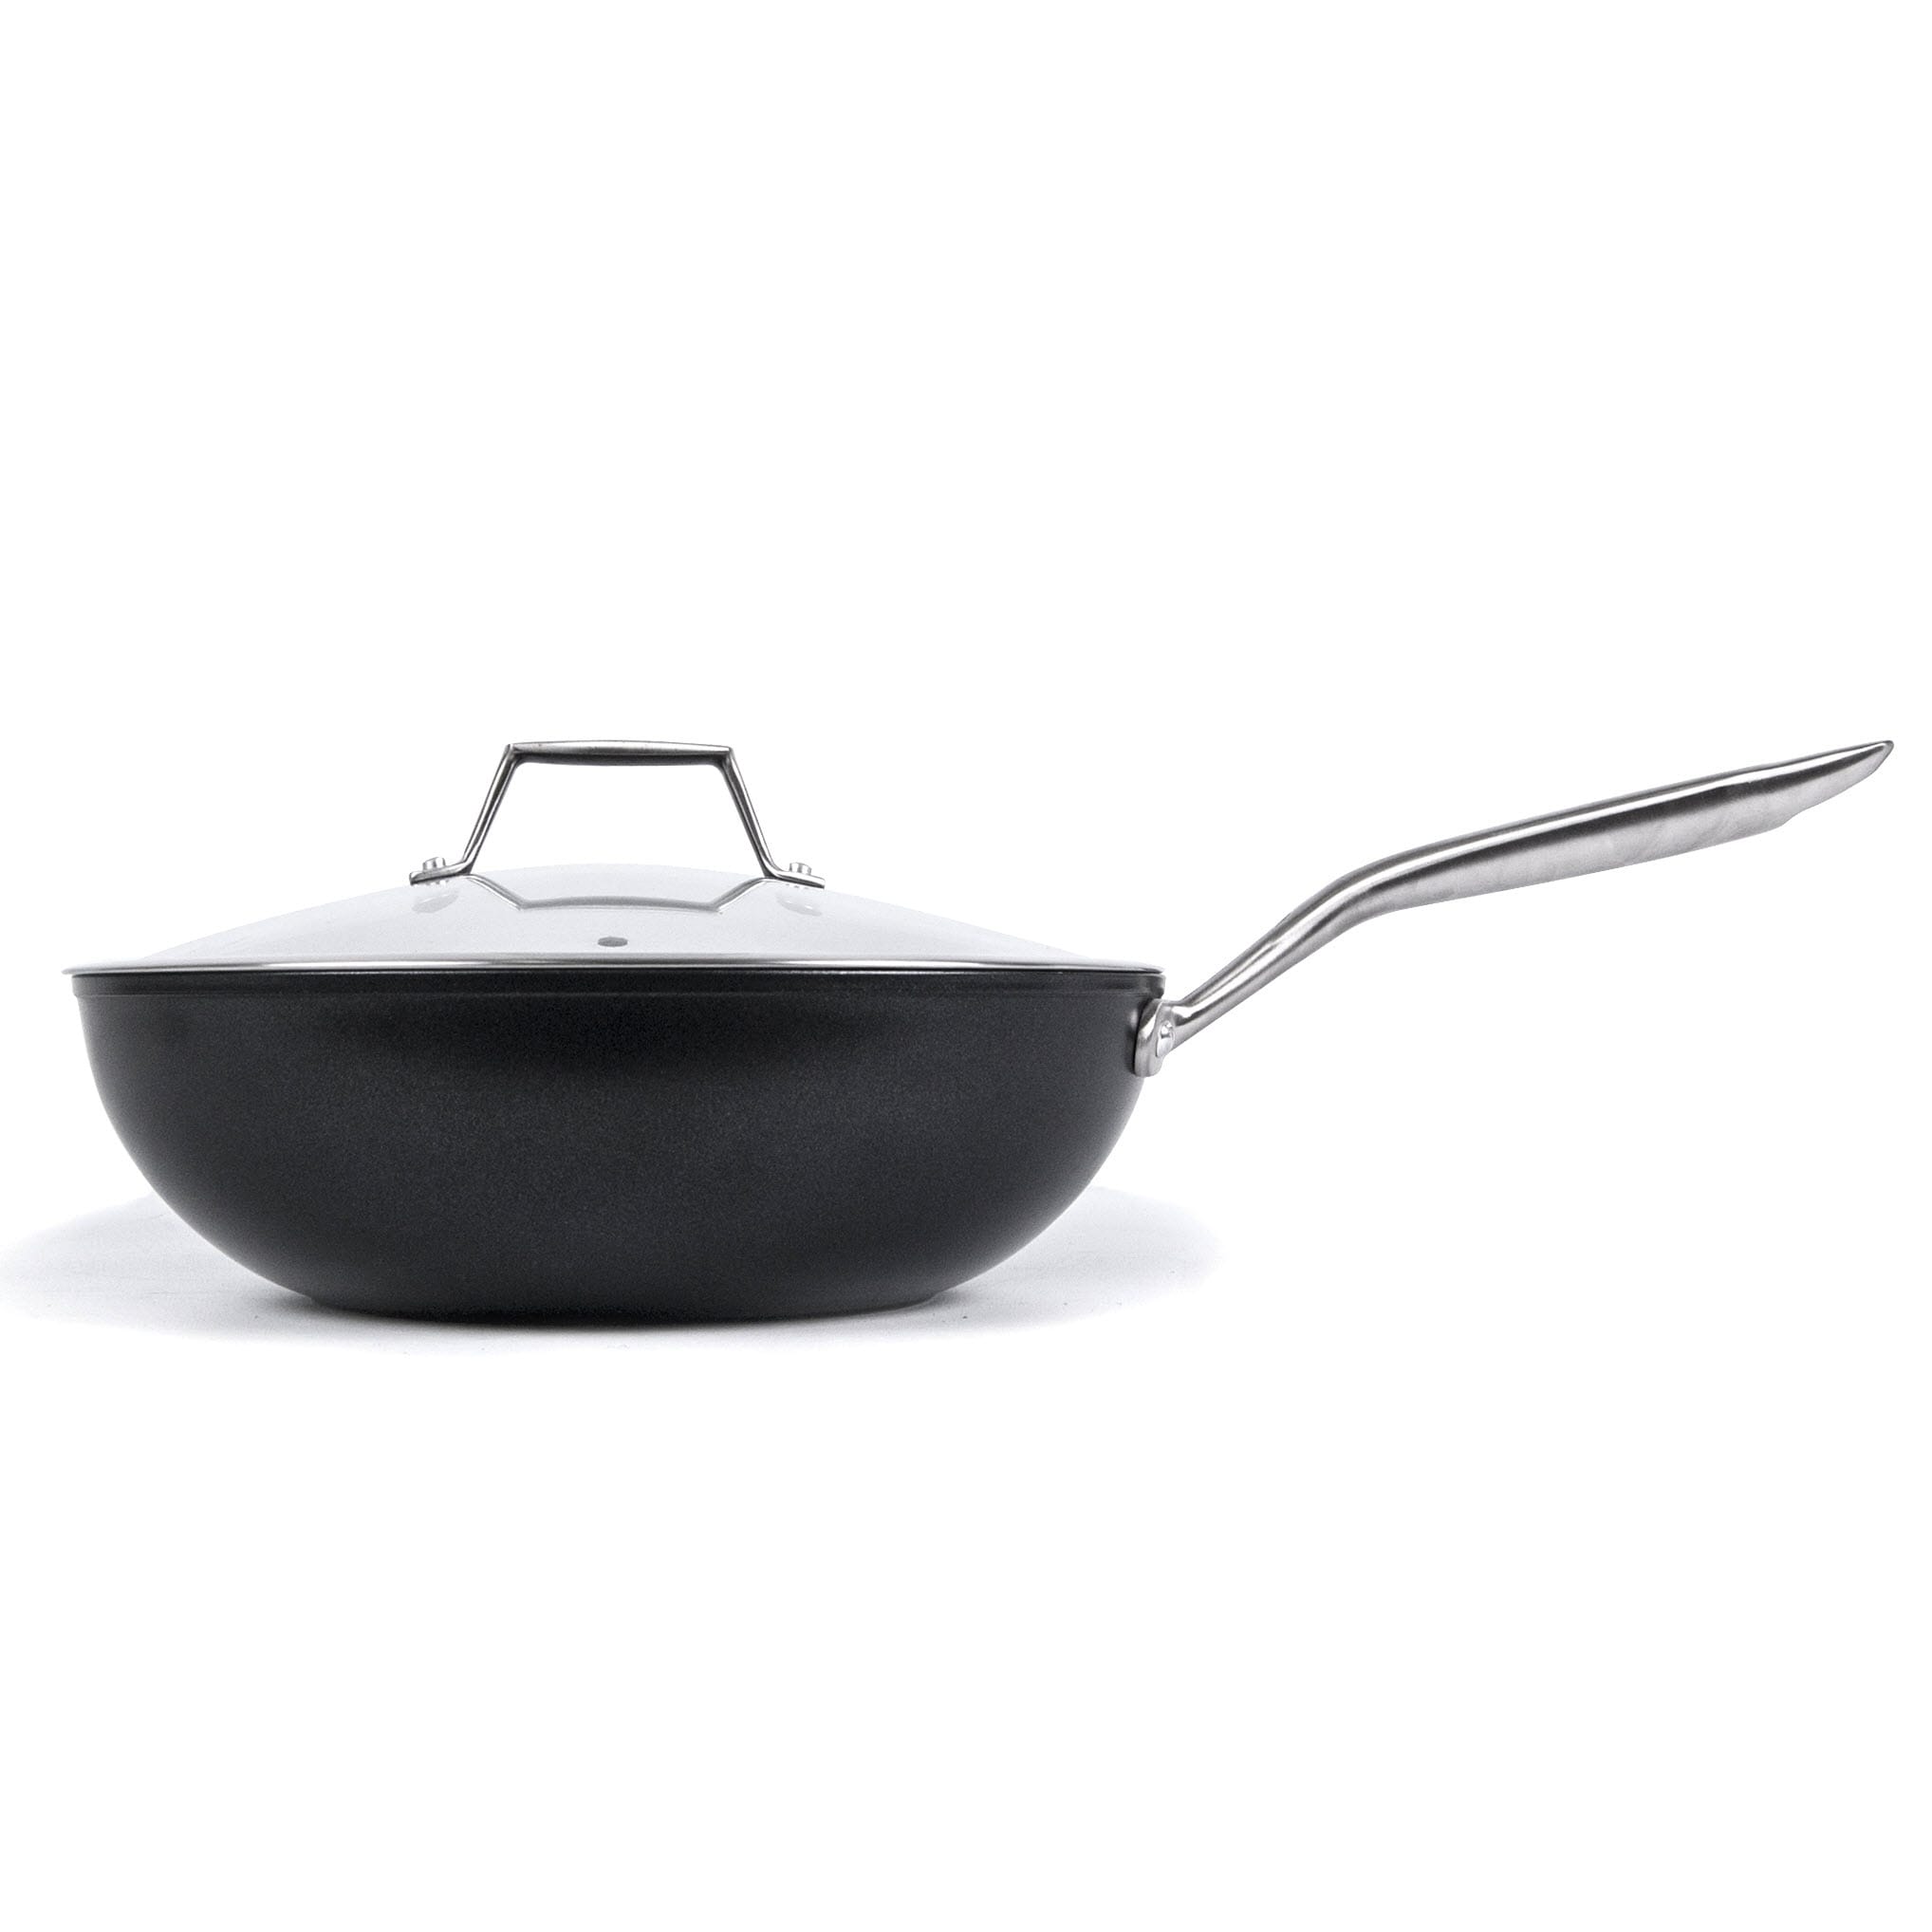  TECHEF - Blooming Flower Frying Pan, with New Teflon